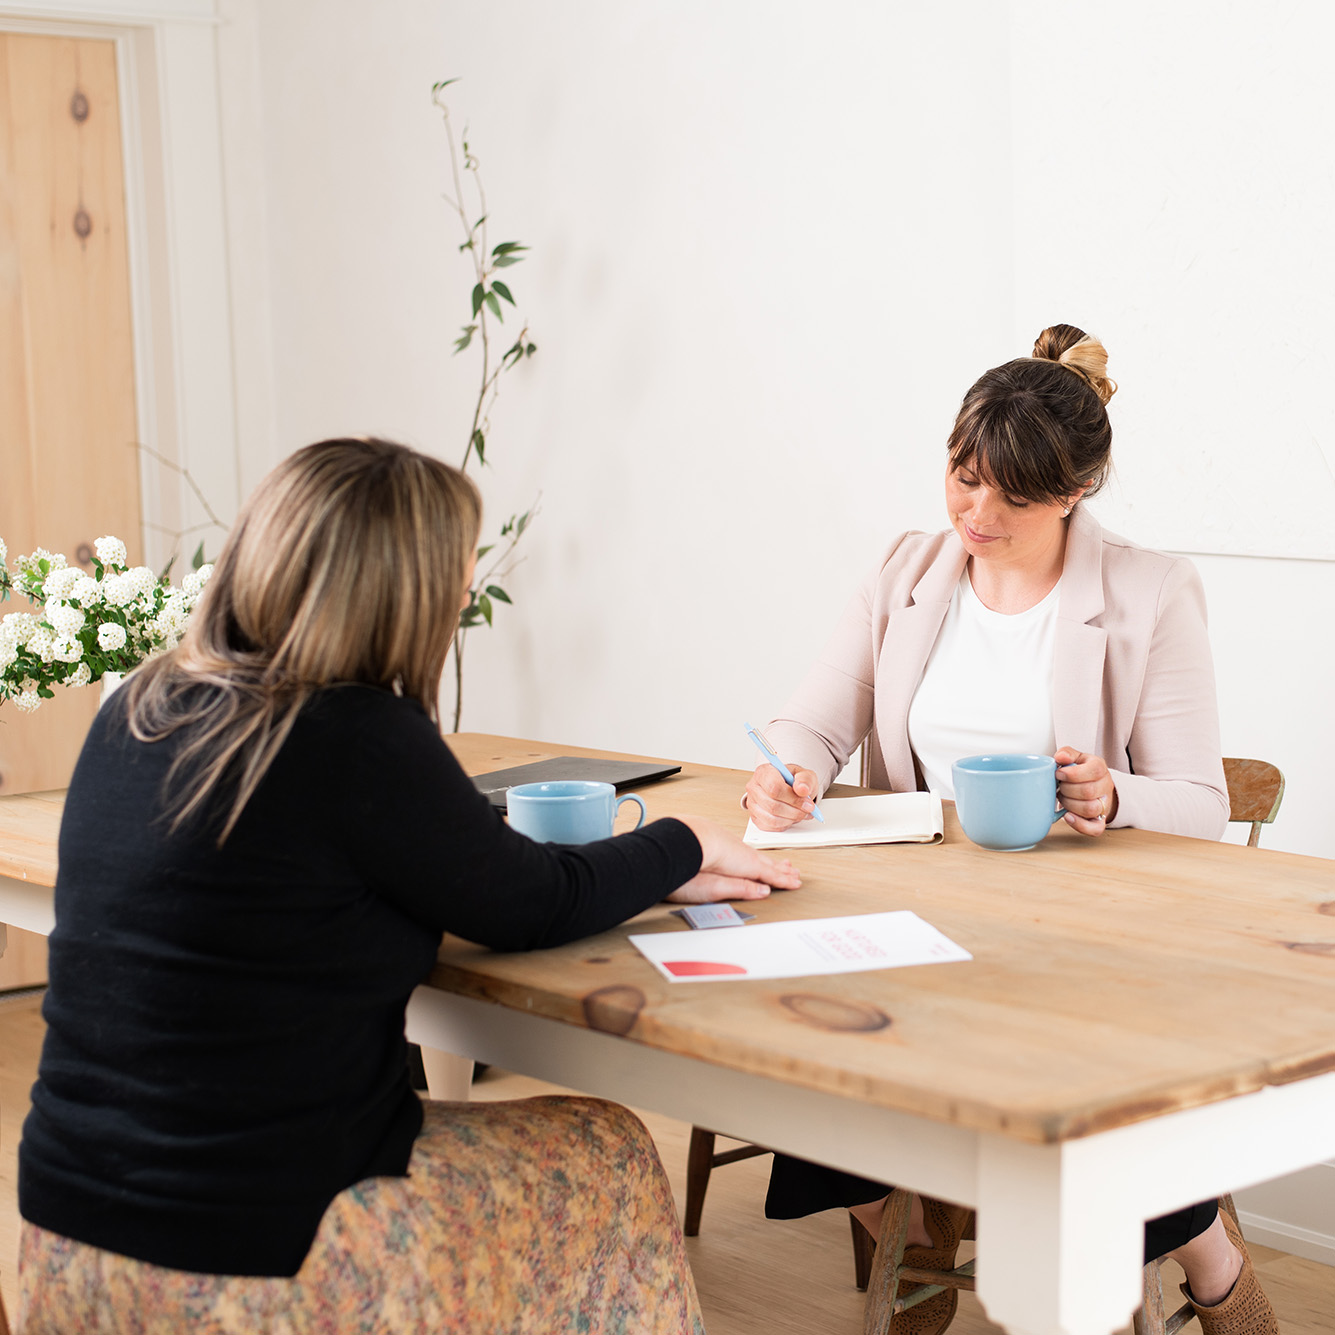 Women sitting at table with blue coffee cups reviewing paperwork